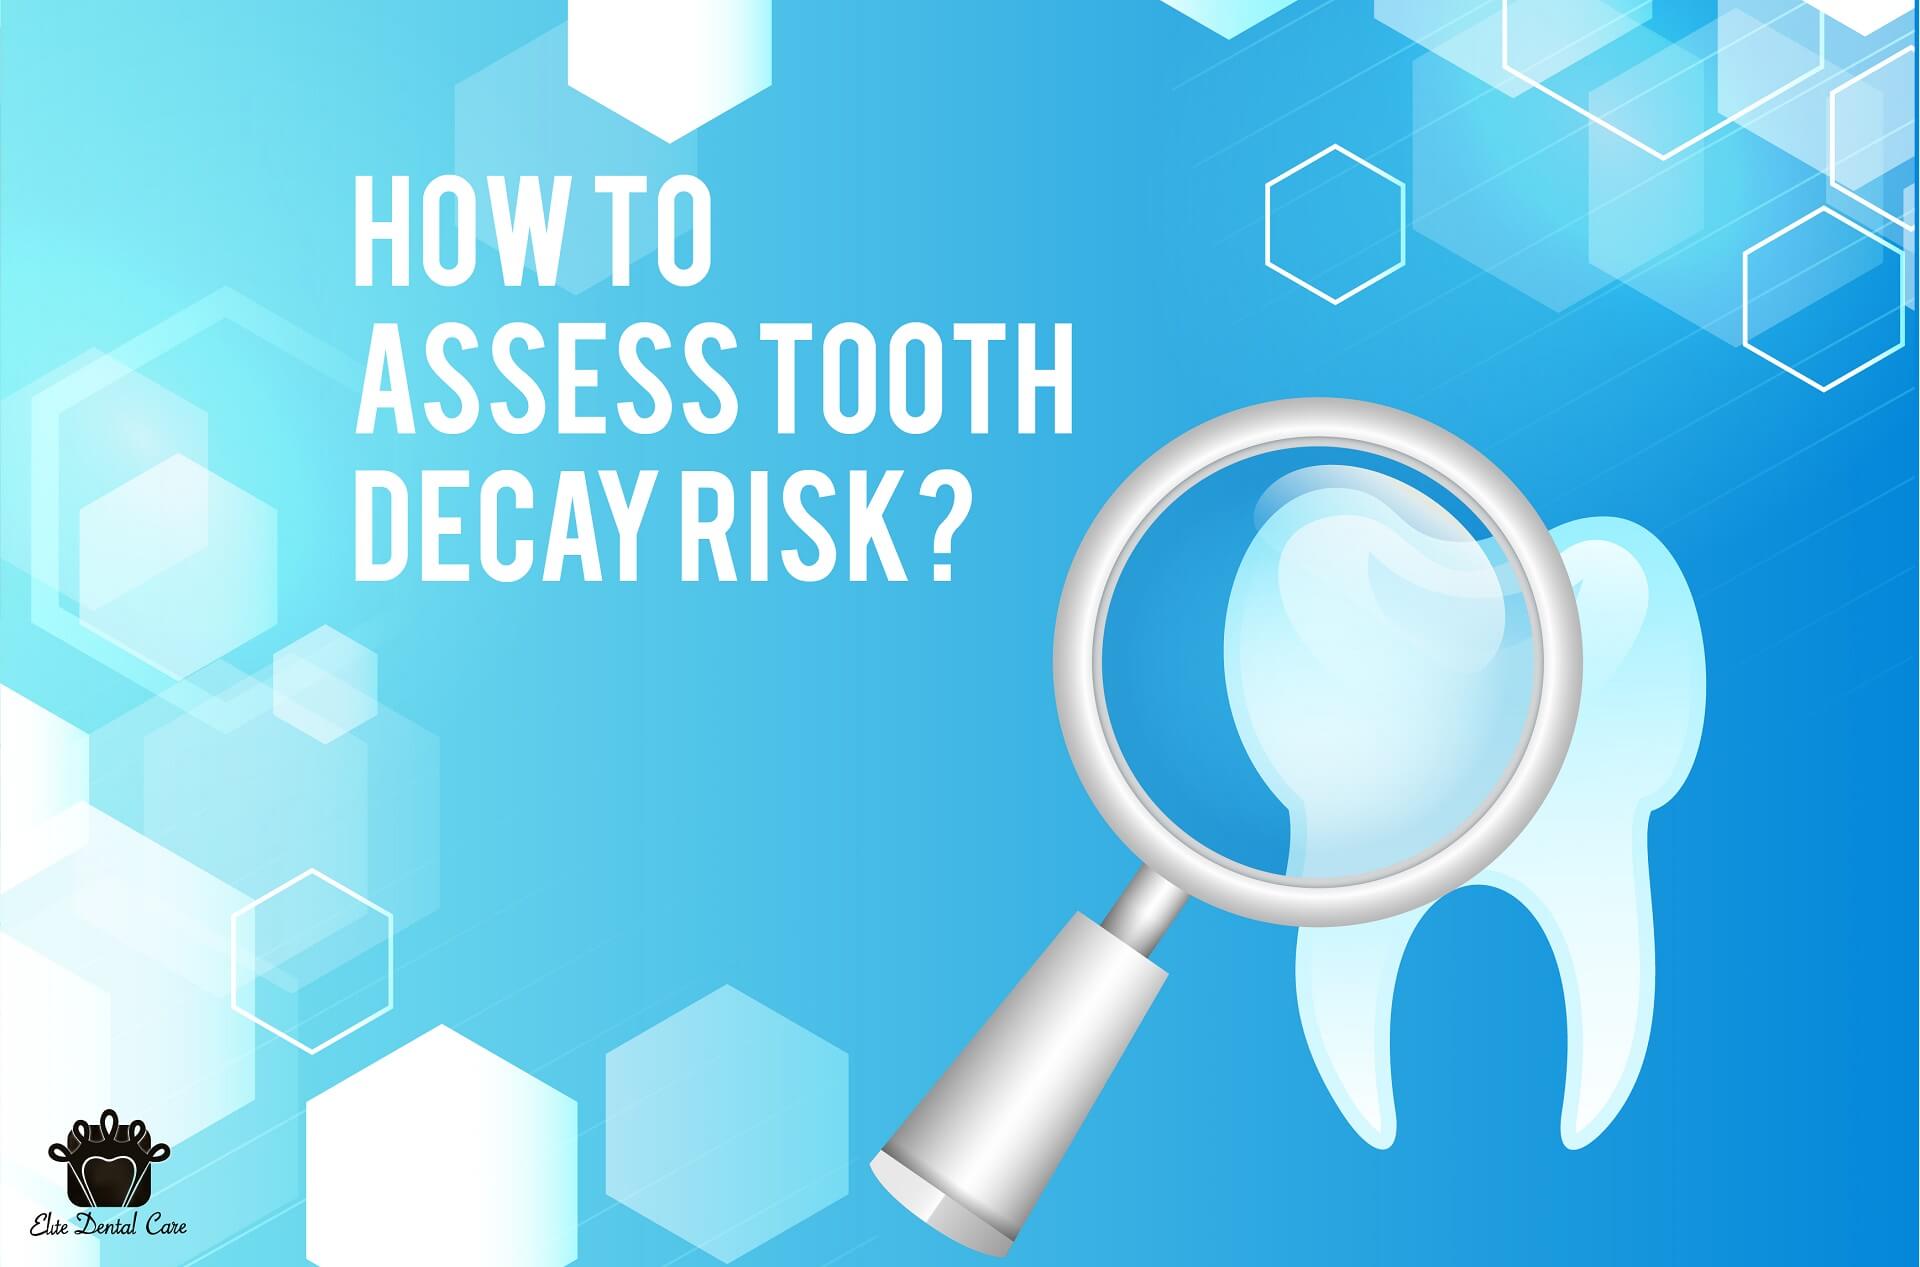 Top 5 risks assessment for tooth decay